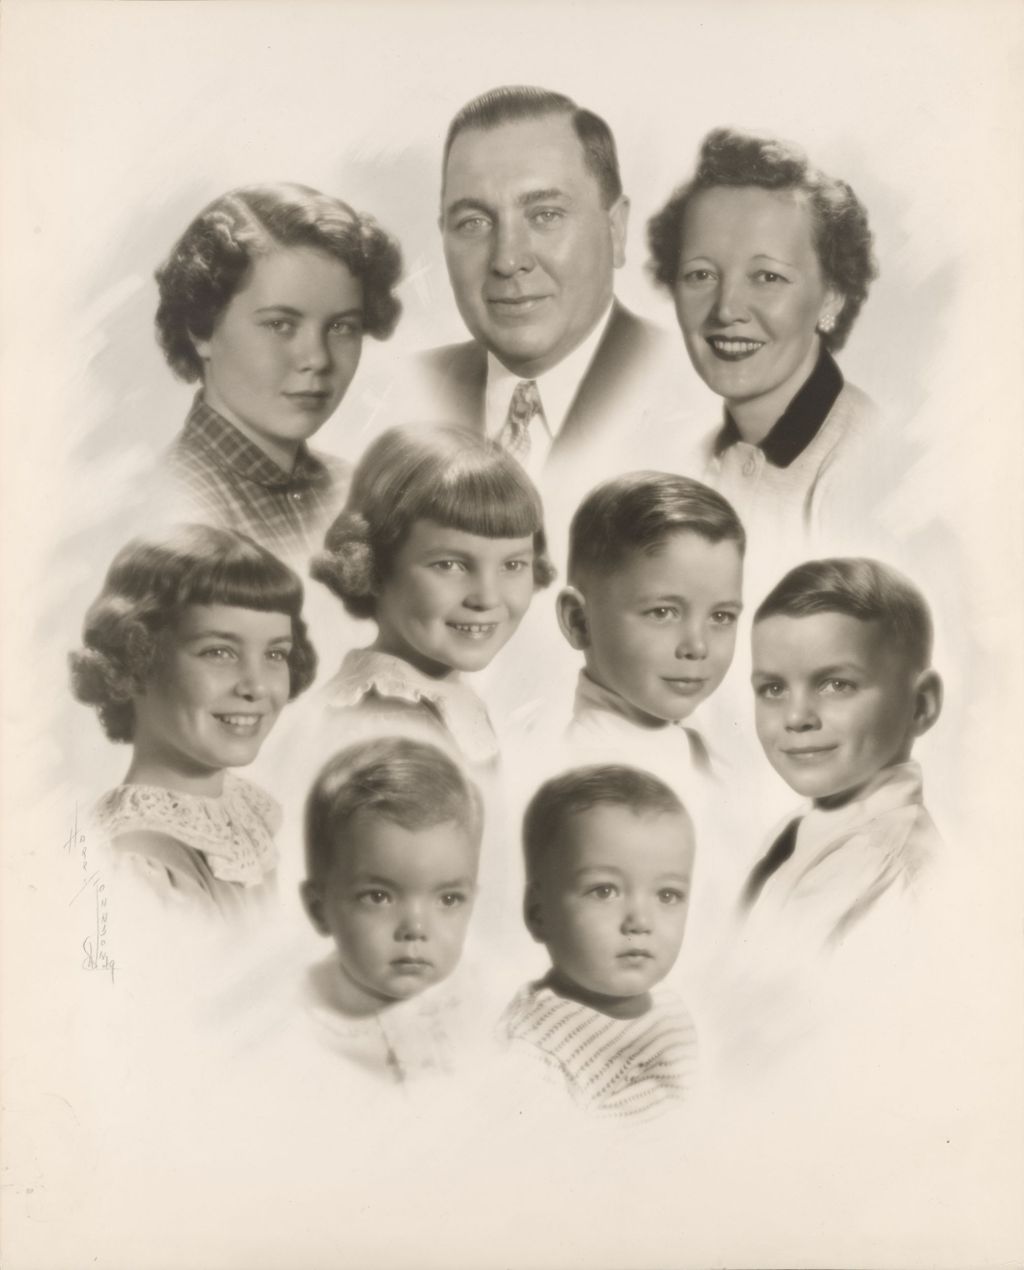 Miniature of Daley family collage portrait